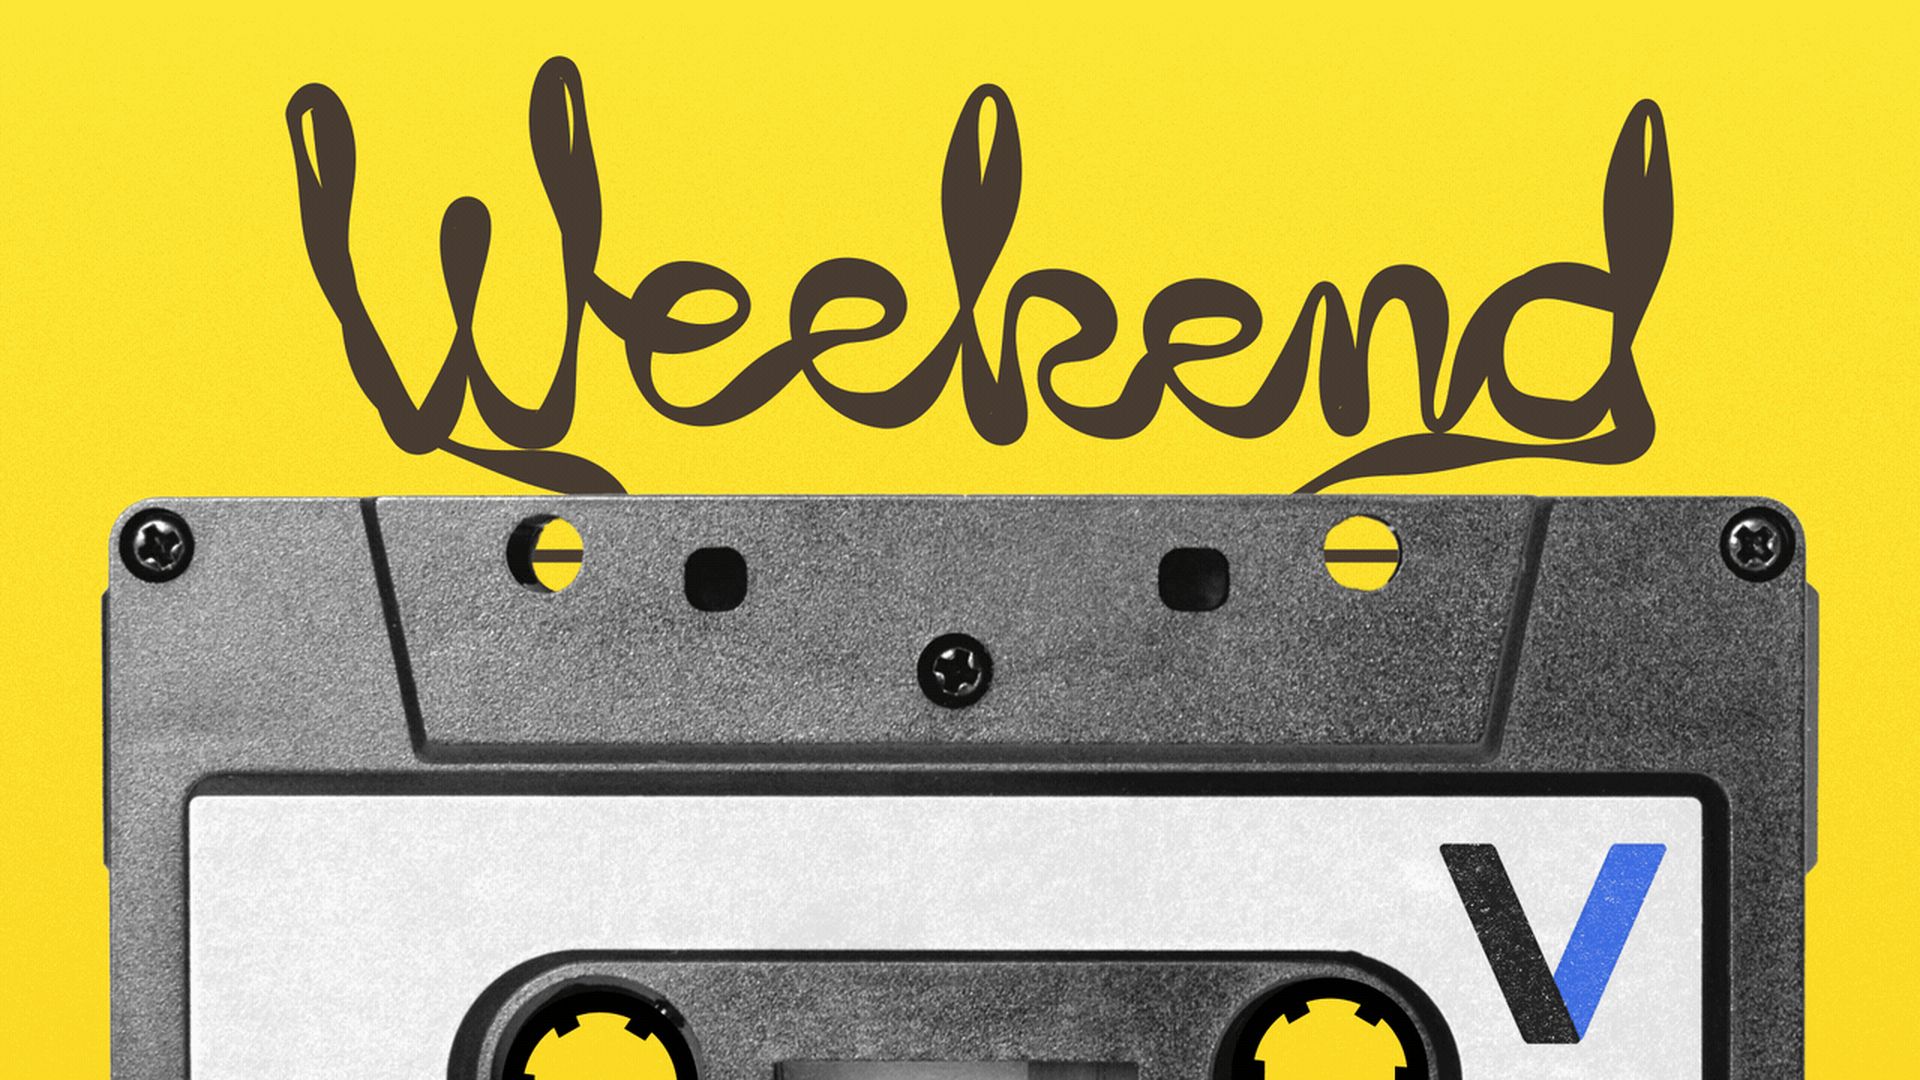 The words "weekend" unspooled above a tape.